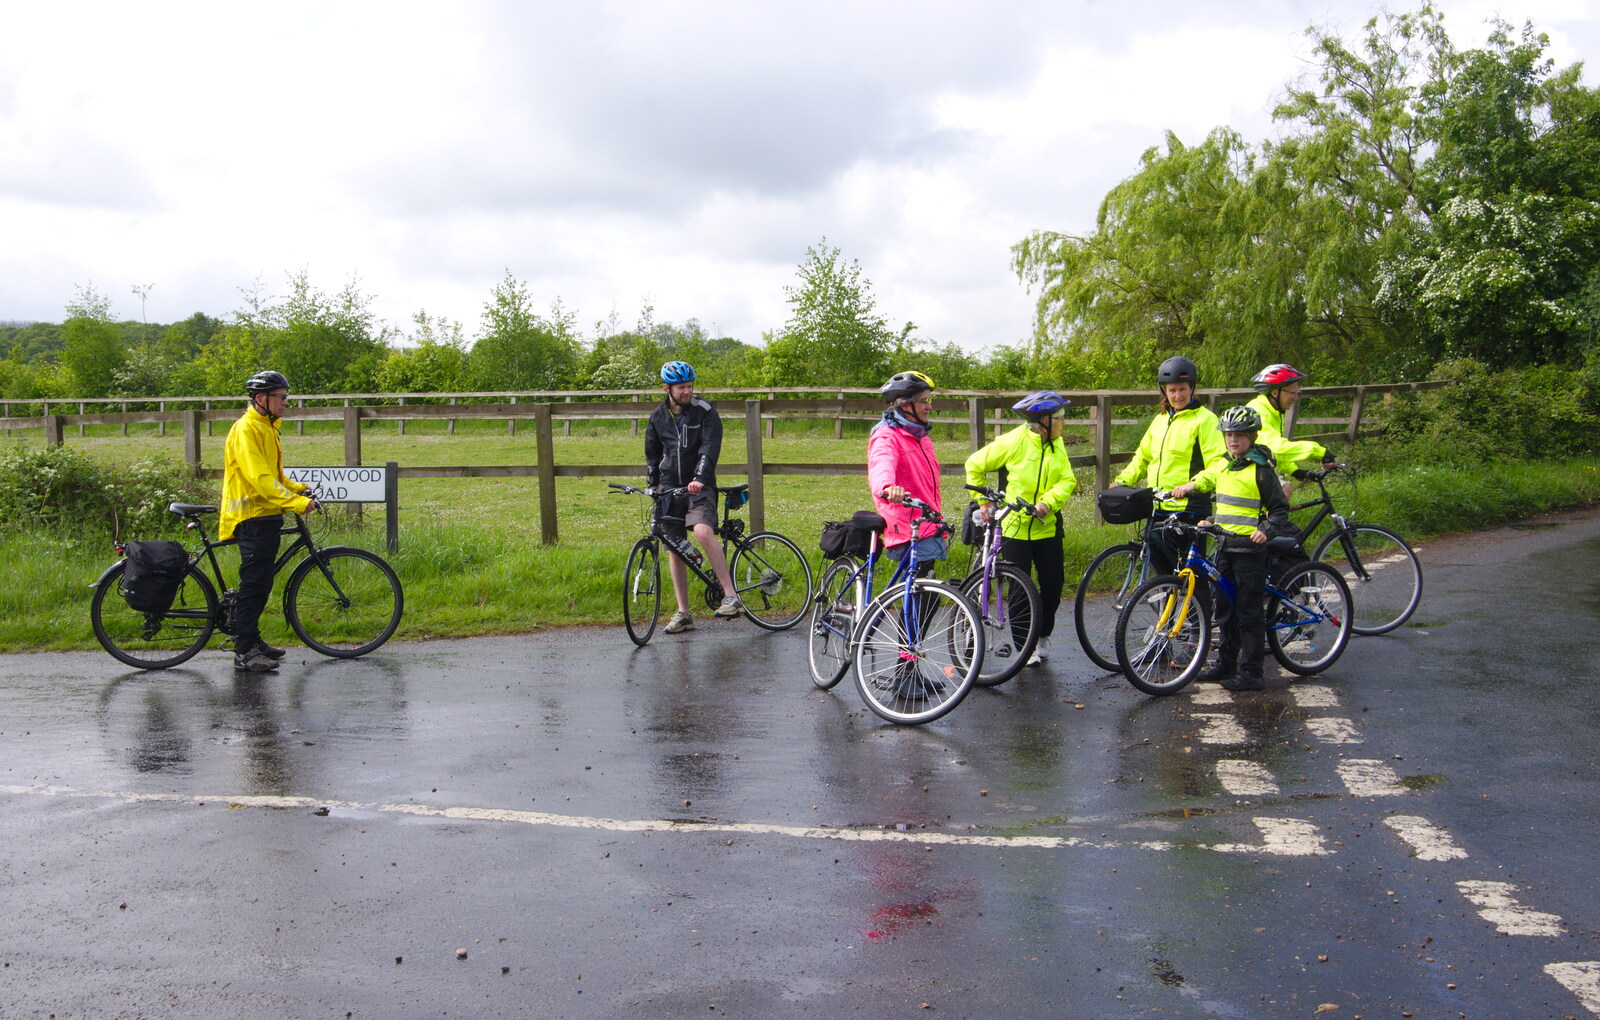 We hang around waiting to regroup from The BSCC Bike Ride 2019, Coggeshall, Essex - 11th May 2019